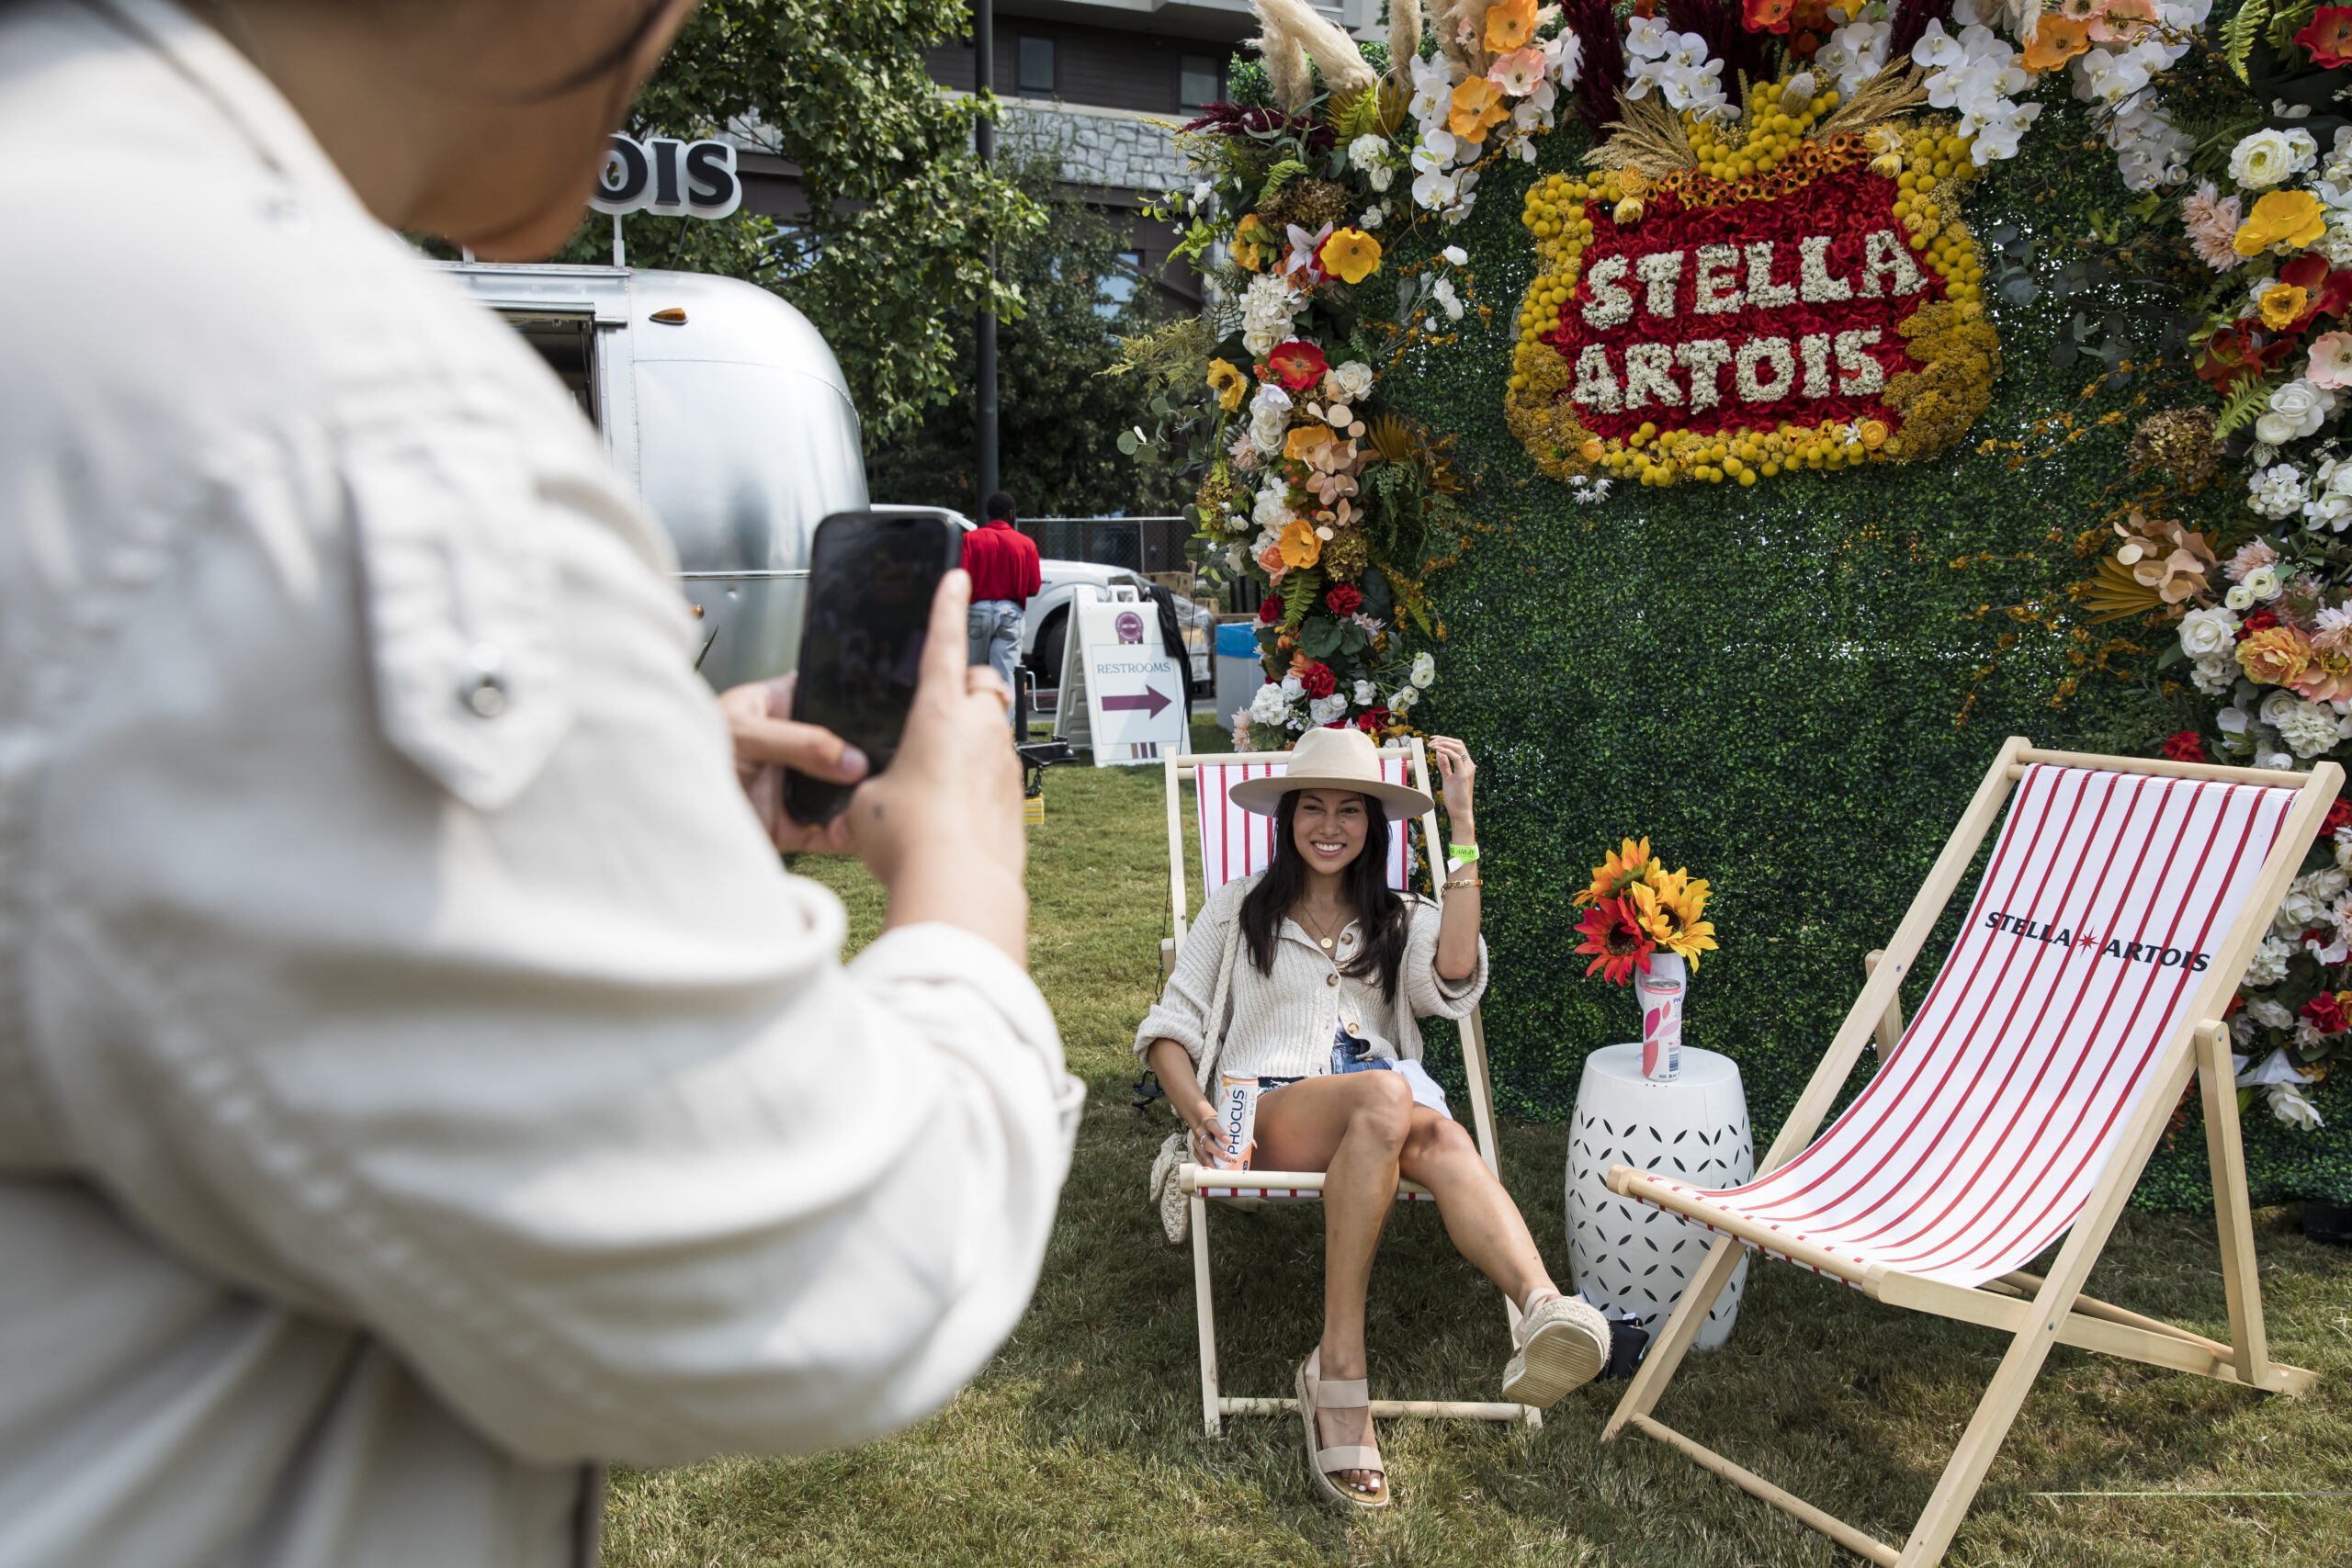 stella artois stand at a21 event